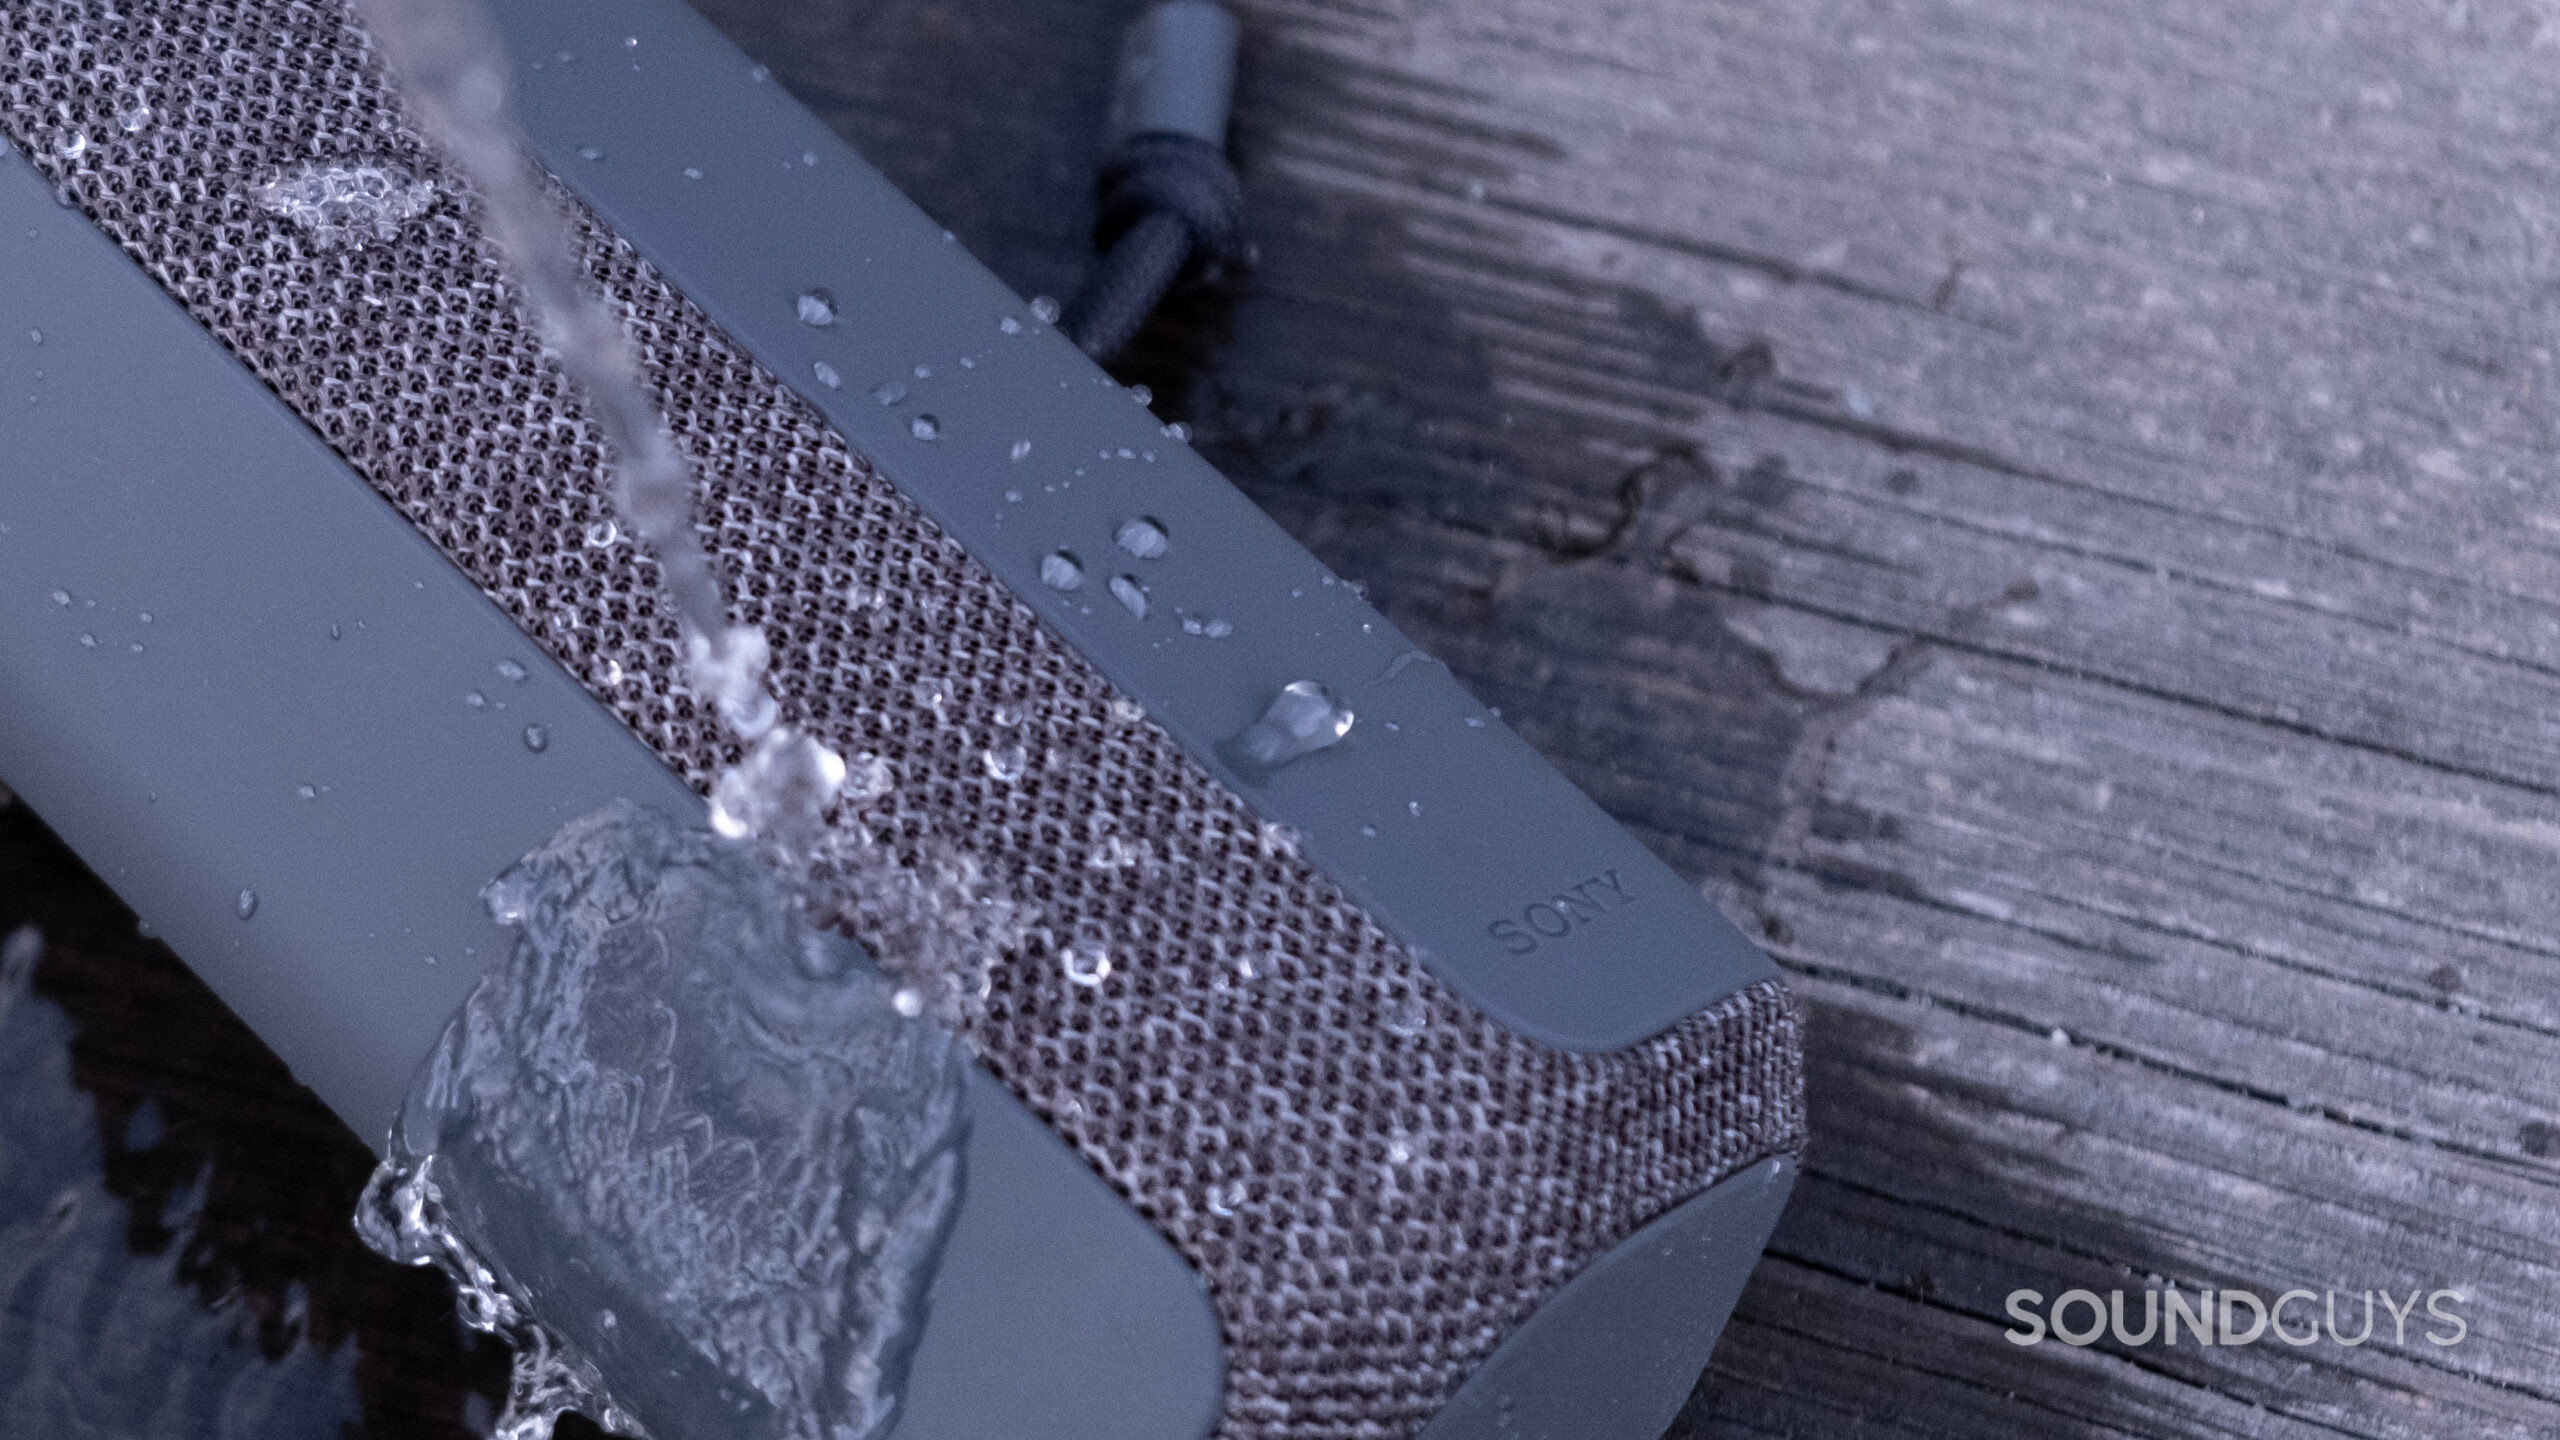 Water pours onto the Sony SRS-XE200 speaker.